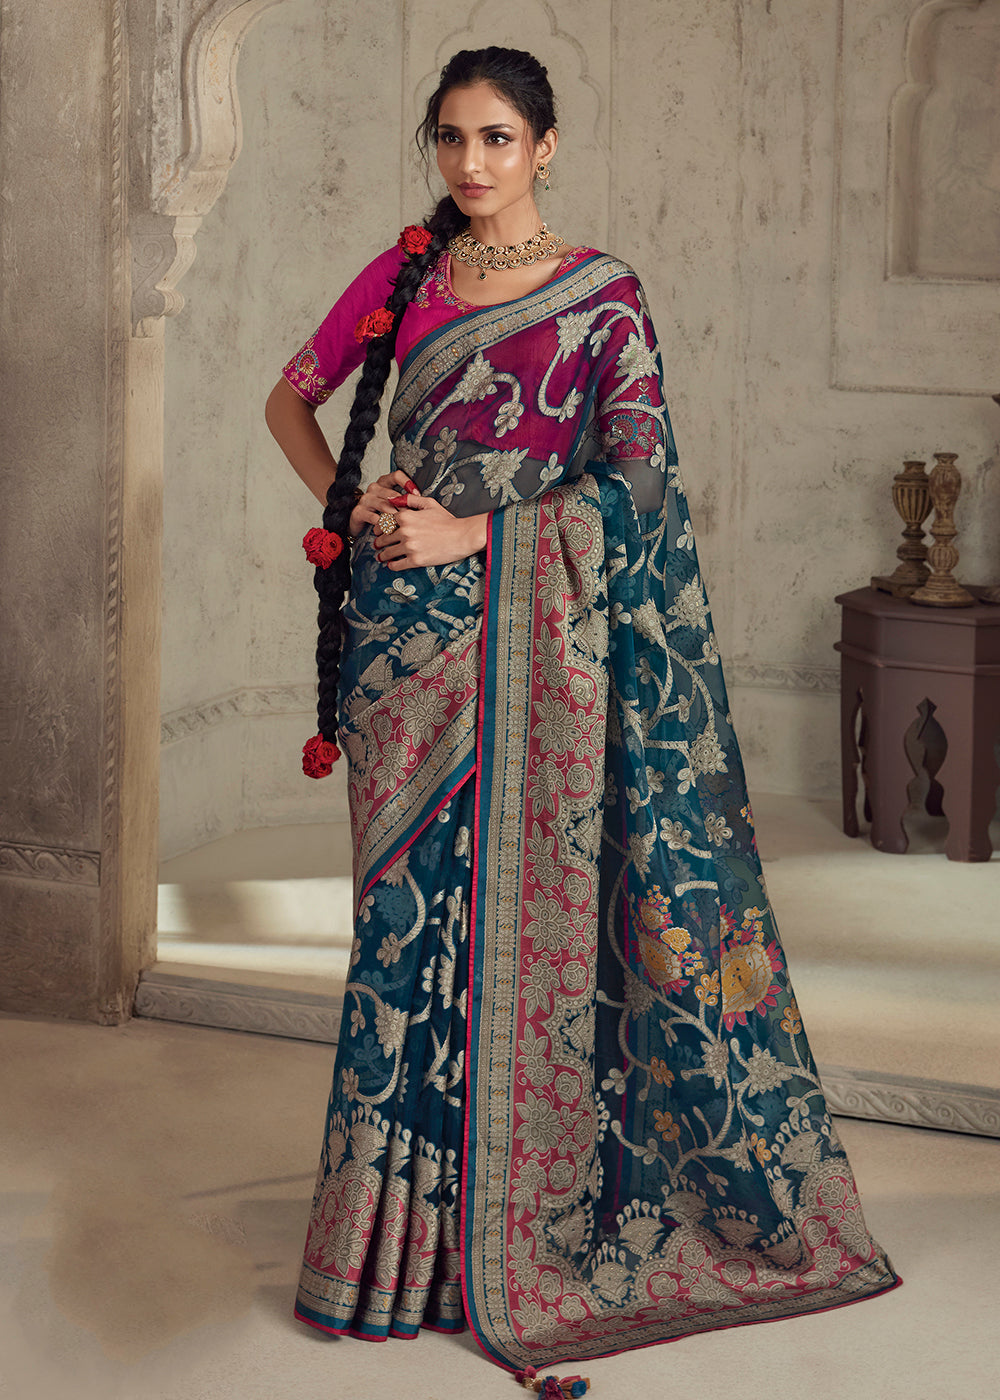 Buy Now Teal Blue Soft Organza Brasso Embroidered Wedding Festive Saree Online in USA, UK, Canada & Worldwide at Empress Clothing. 